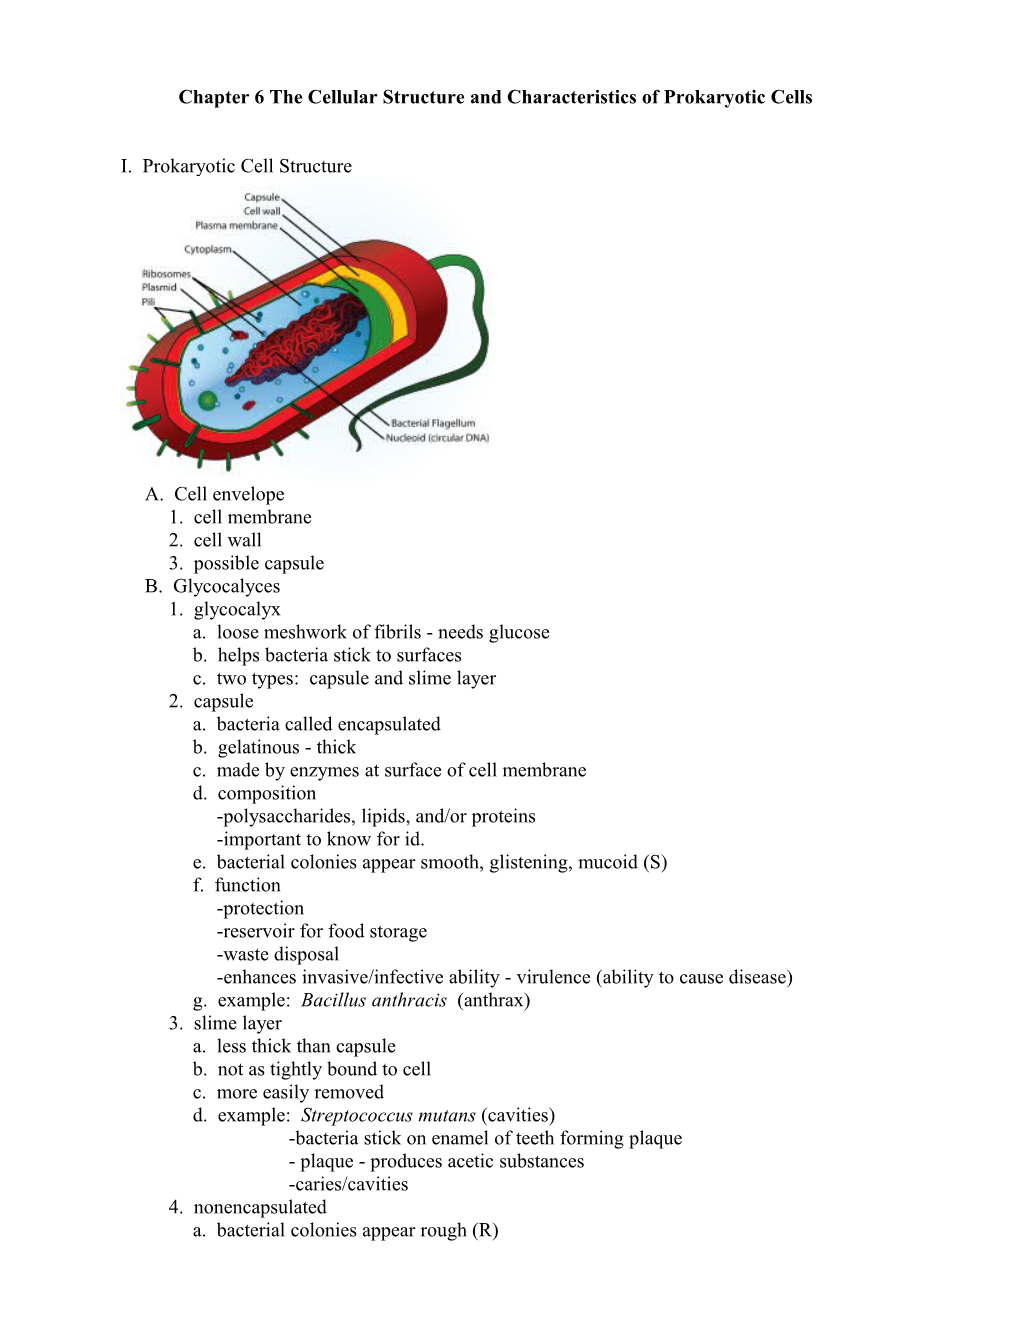 Chapter 6 the Cellular Structure and Characteristics of Prokaryotic Cells